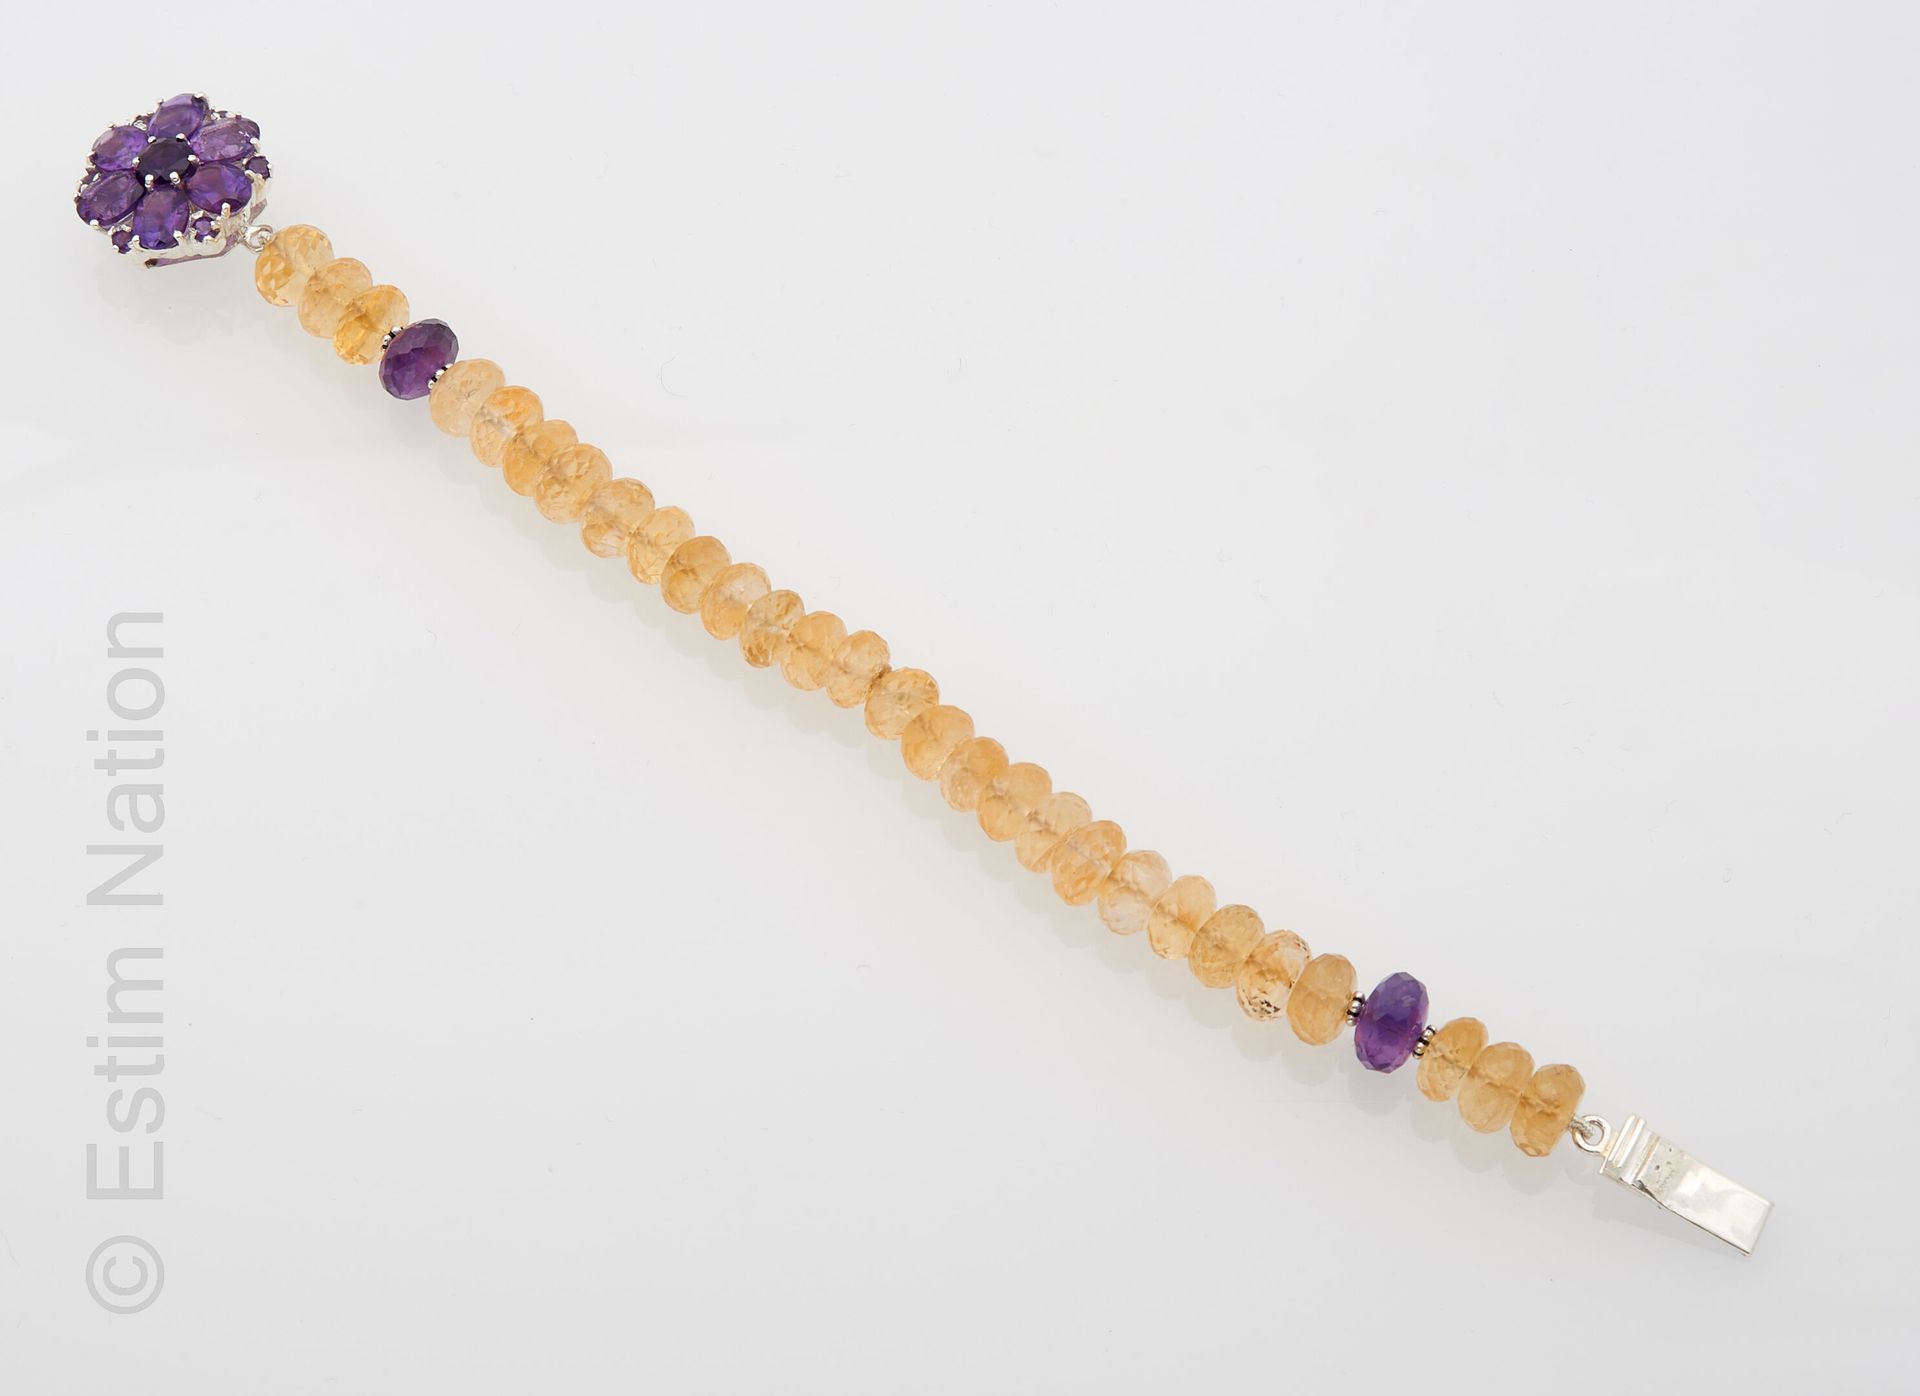 BRACELET CITRINES, AMÉTHYSTES. Bracelet decorated with citrine beads punctuated &hellip;